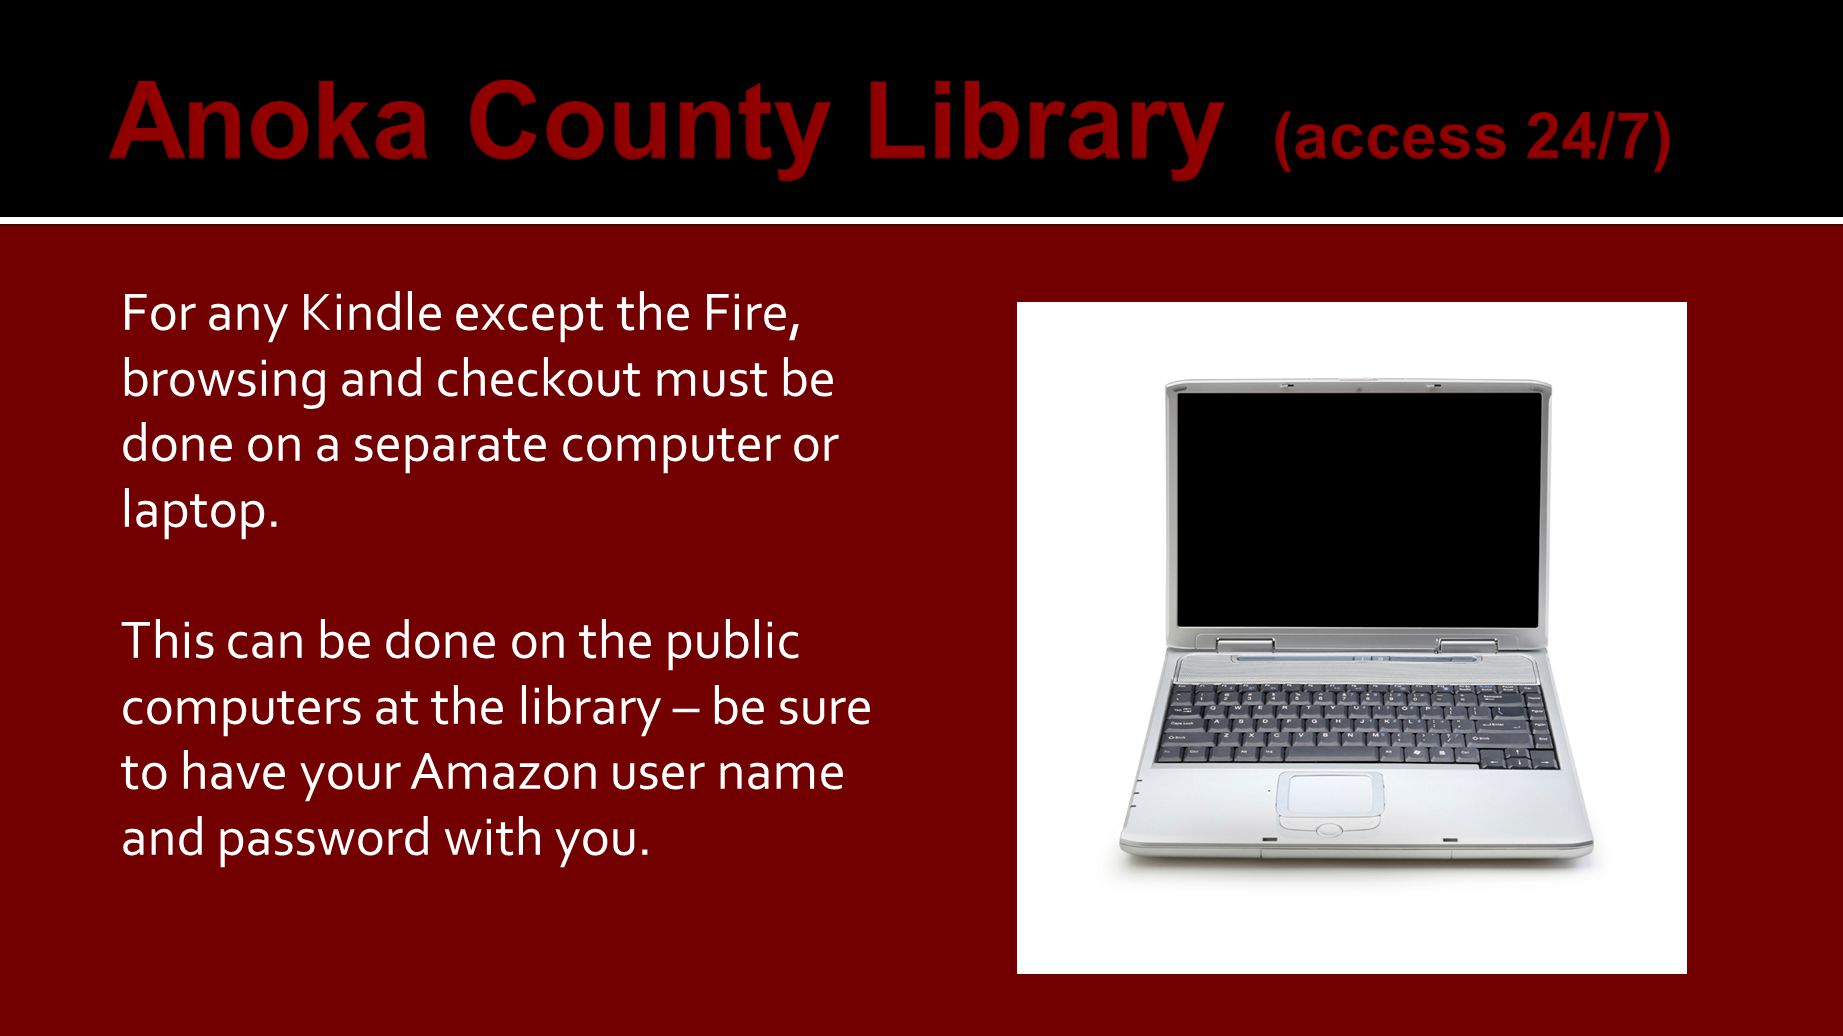 For any Kindle except the Fire, browsing and checkout must be done on a separate computer or laptop.